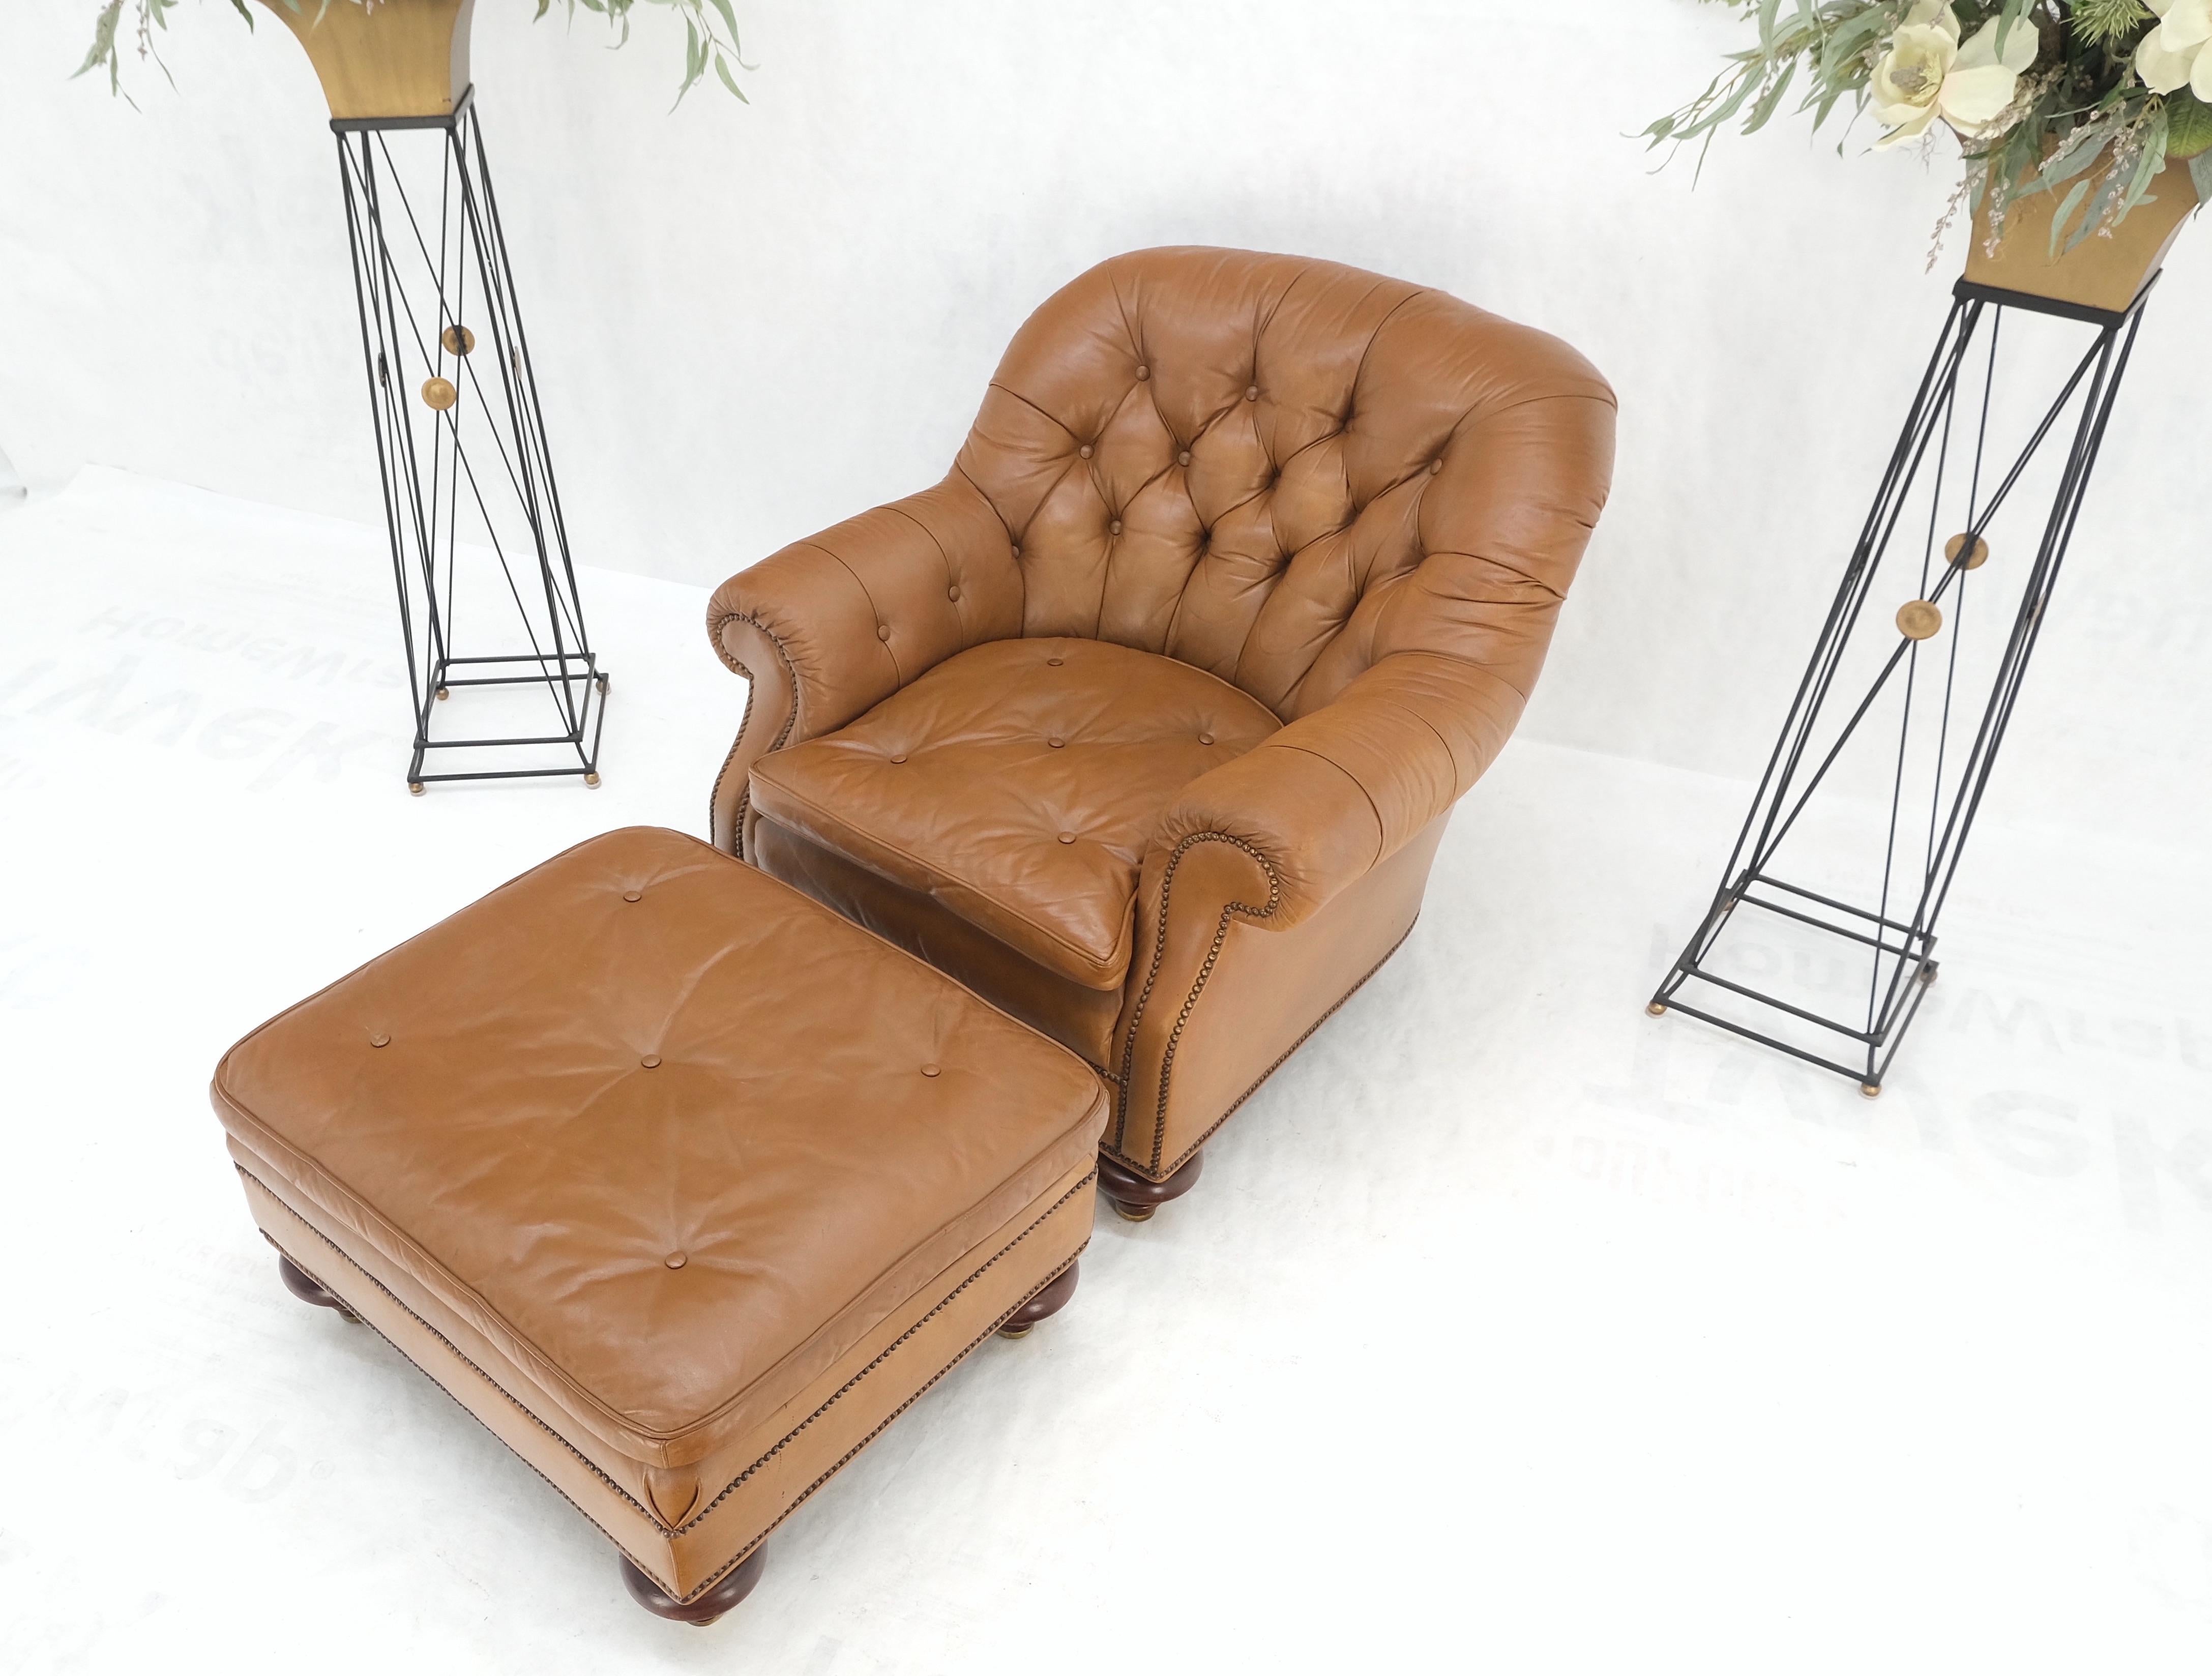 Baker Tan Leather Tufted Back Large Arm Chair w/ Ottoman Pouf Turned Legs MINT!
Chair: 32 x 37 x 34, seat height: 19
Ottoman: 26 x 30 × 16.5.